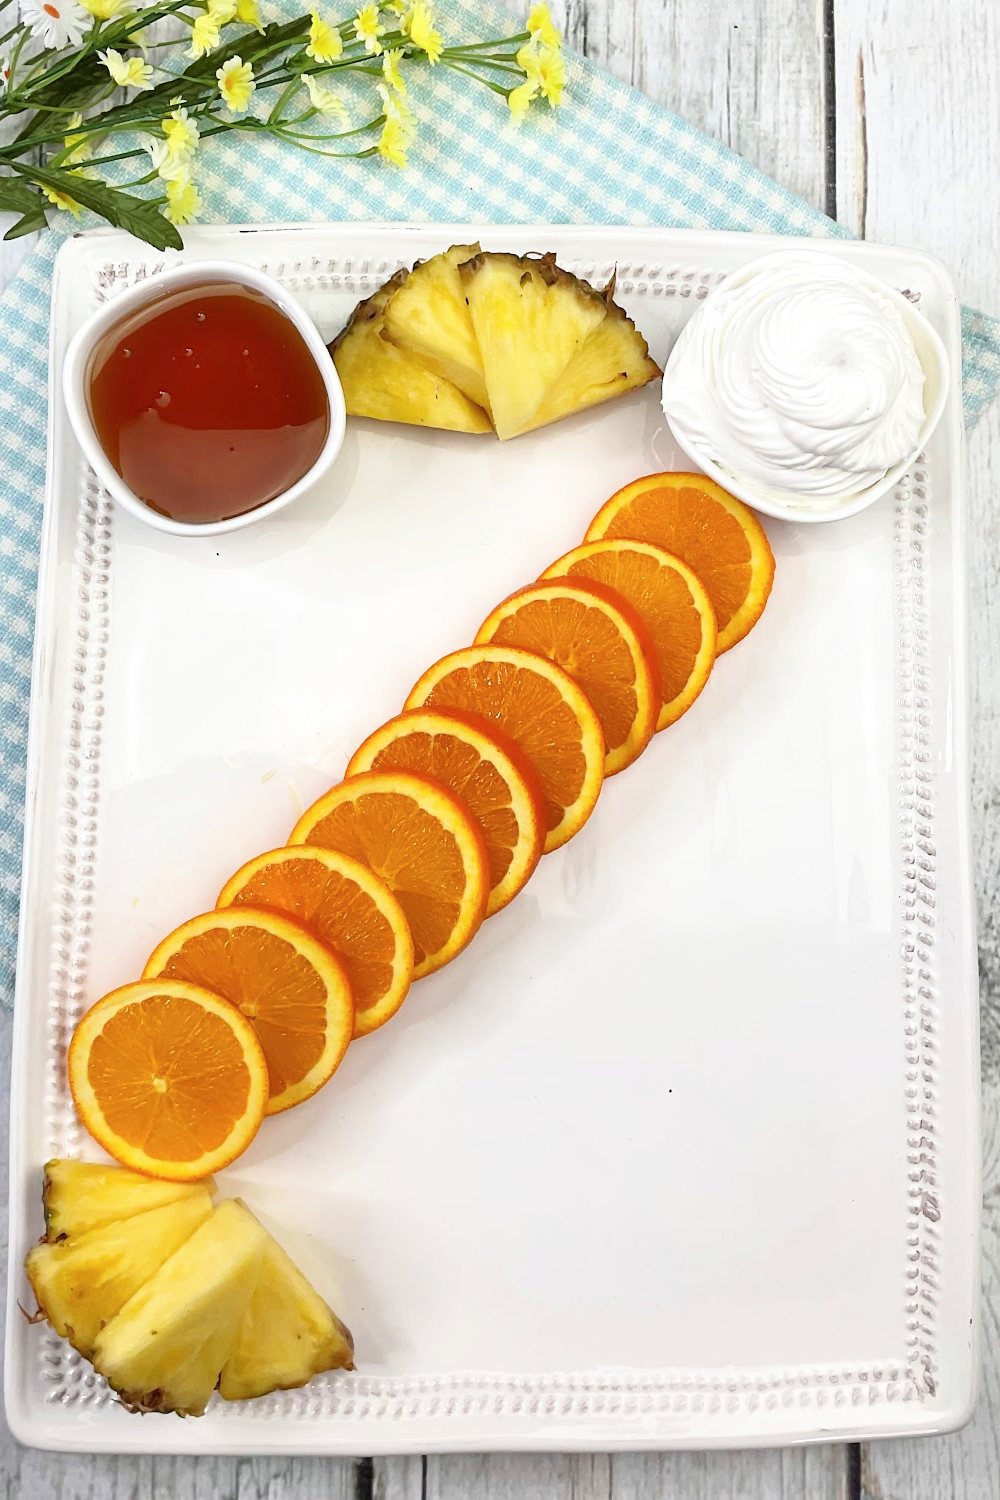 How to make a fruit platter or fruit charcuterie board. Start by placing sliced oranges across the center of the plater on a diagonal.